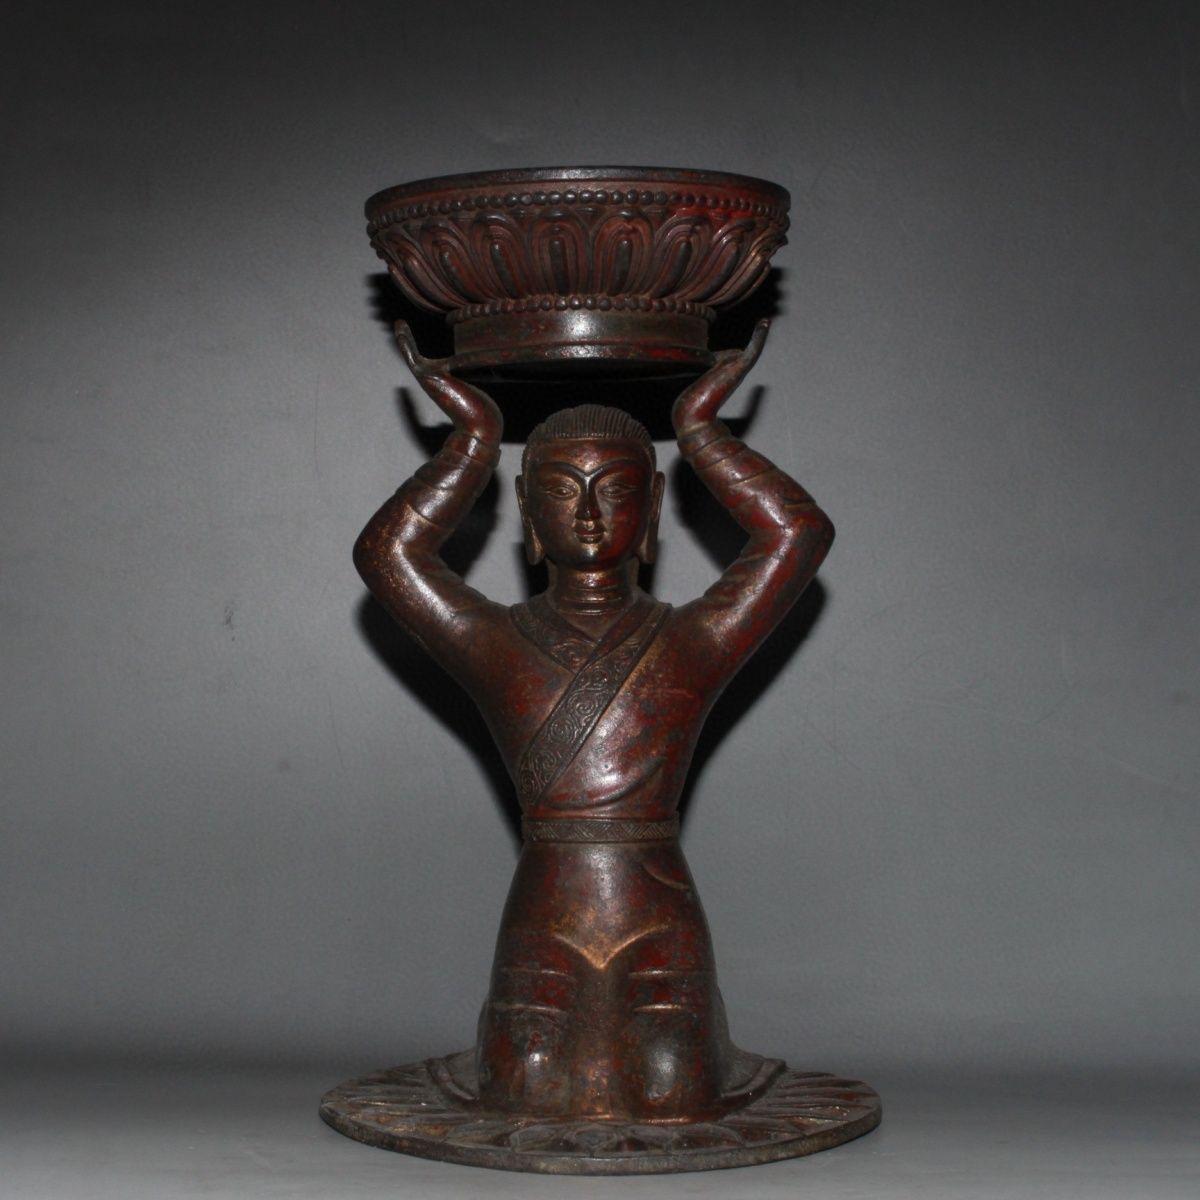 This Chinese Vintage Bronze Kneeling Down Buddha Candle Holder Statue is rare and special.

Unlike traditional Buddha sculptures that depict the figure seated in meditation, this particular piece show the Buddha in a kneeling position with both